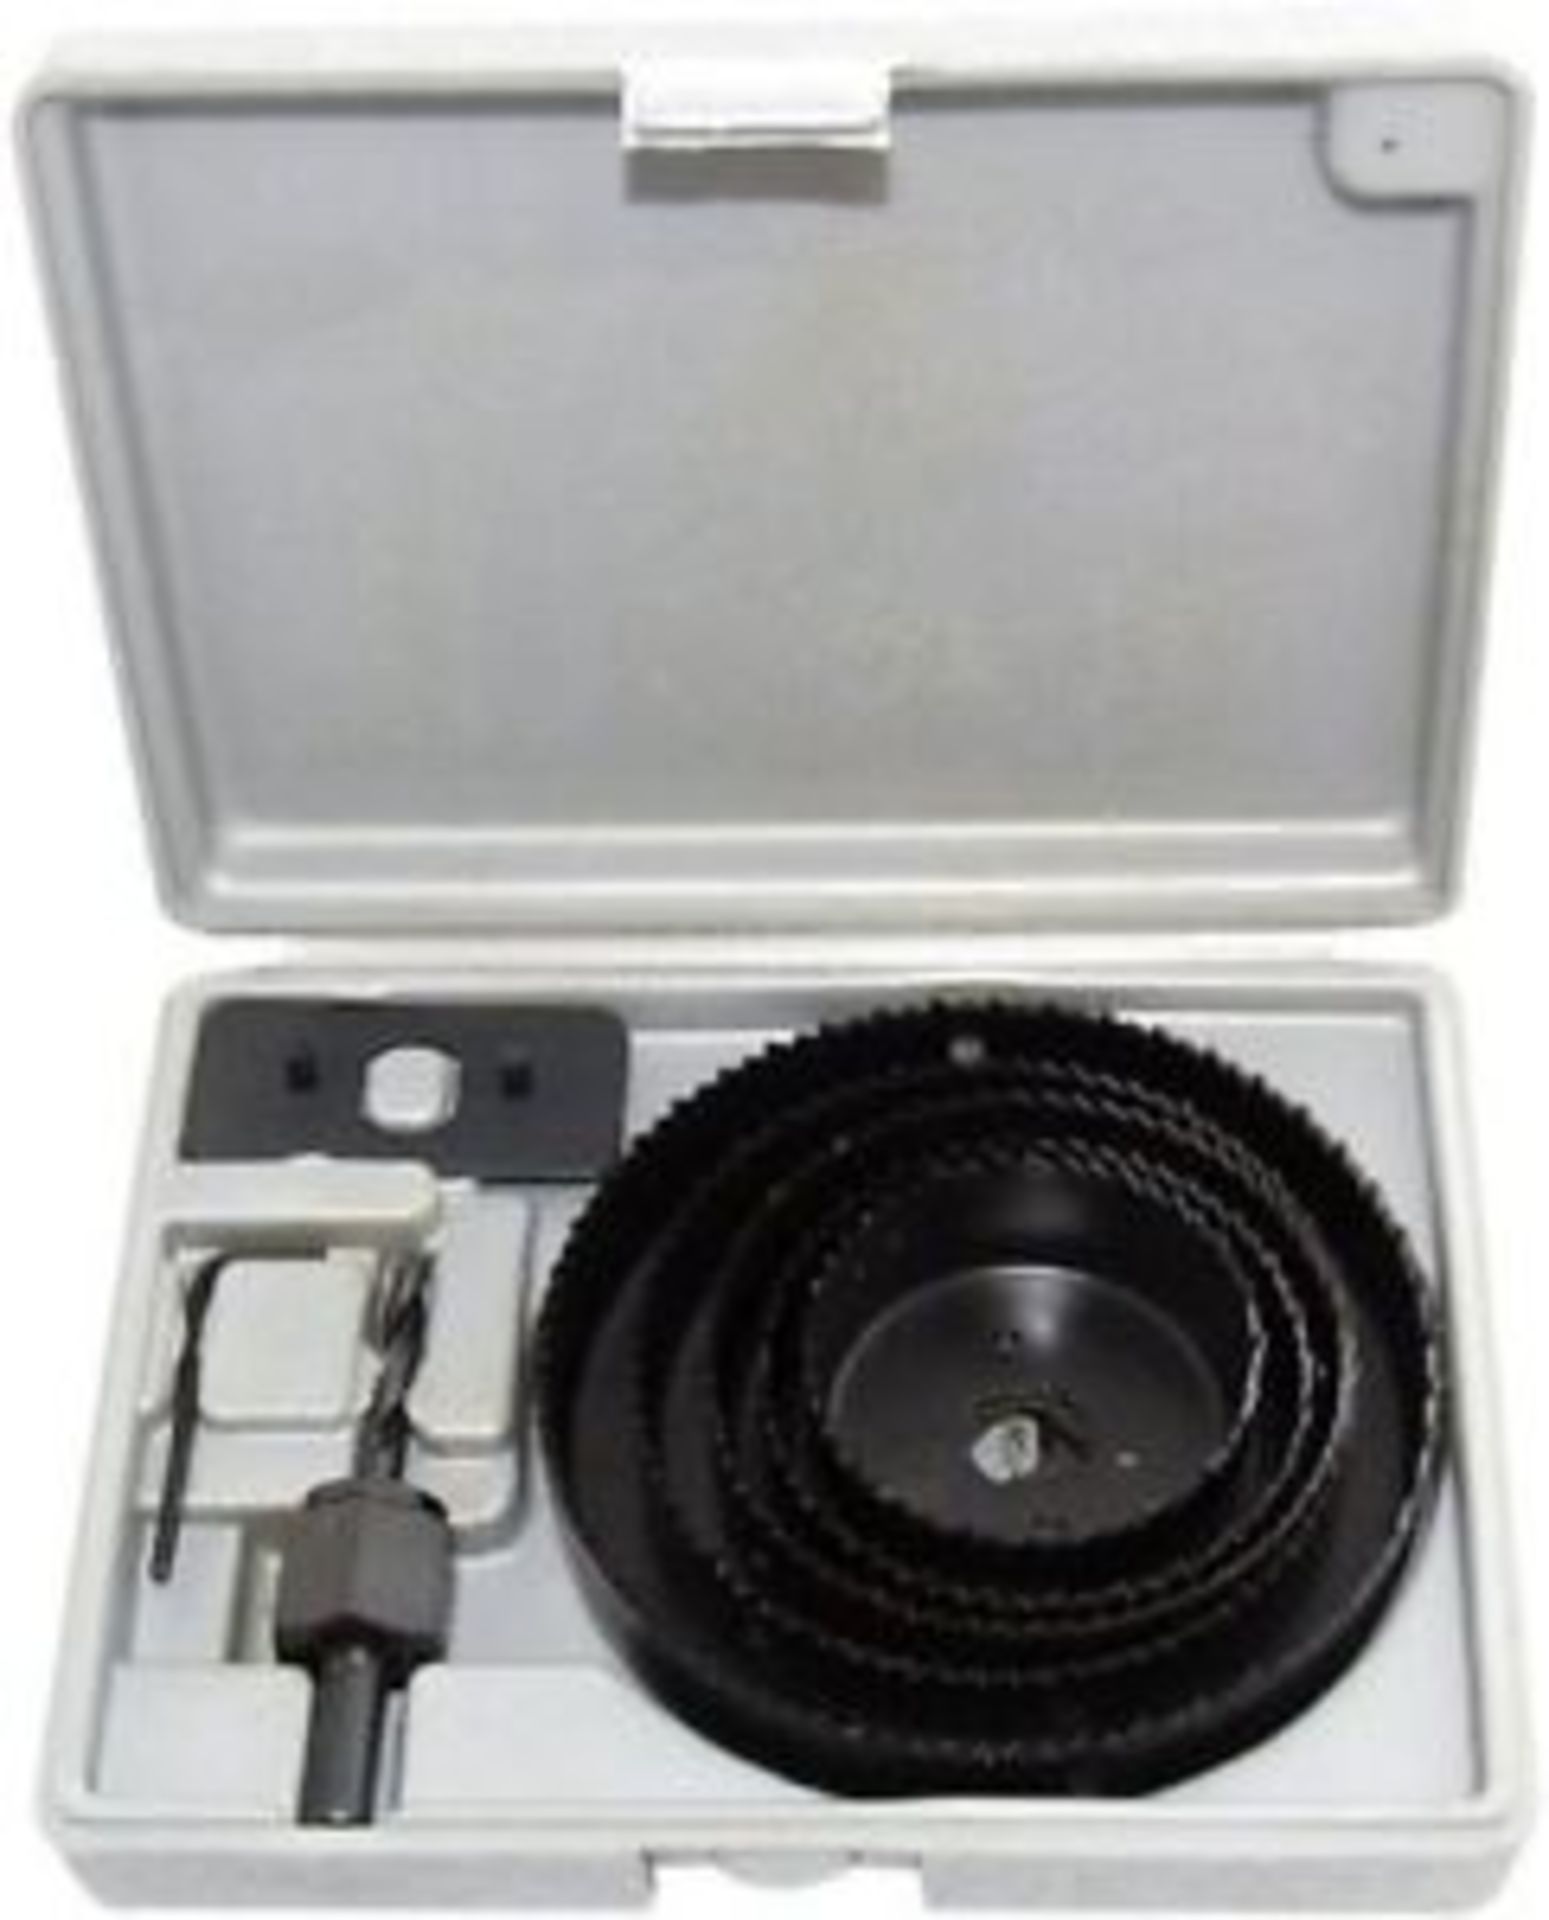 V *TRADE QTY* Brand New 8 Piece Hole Saw Kit Including 5 Sizes Of Blades X 4 YOUR BID PRICE TO BE